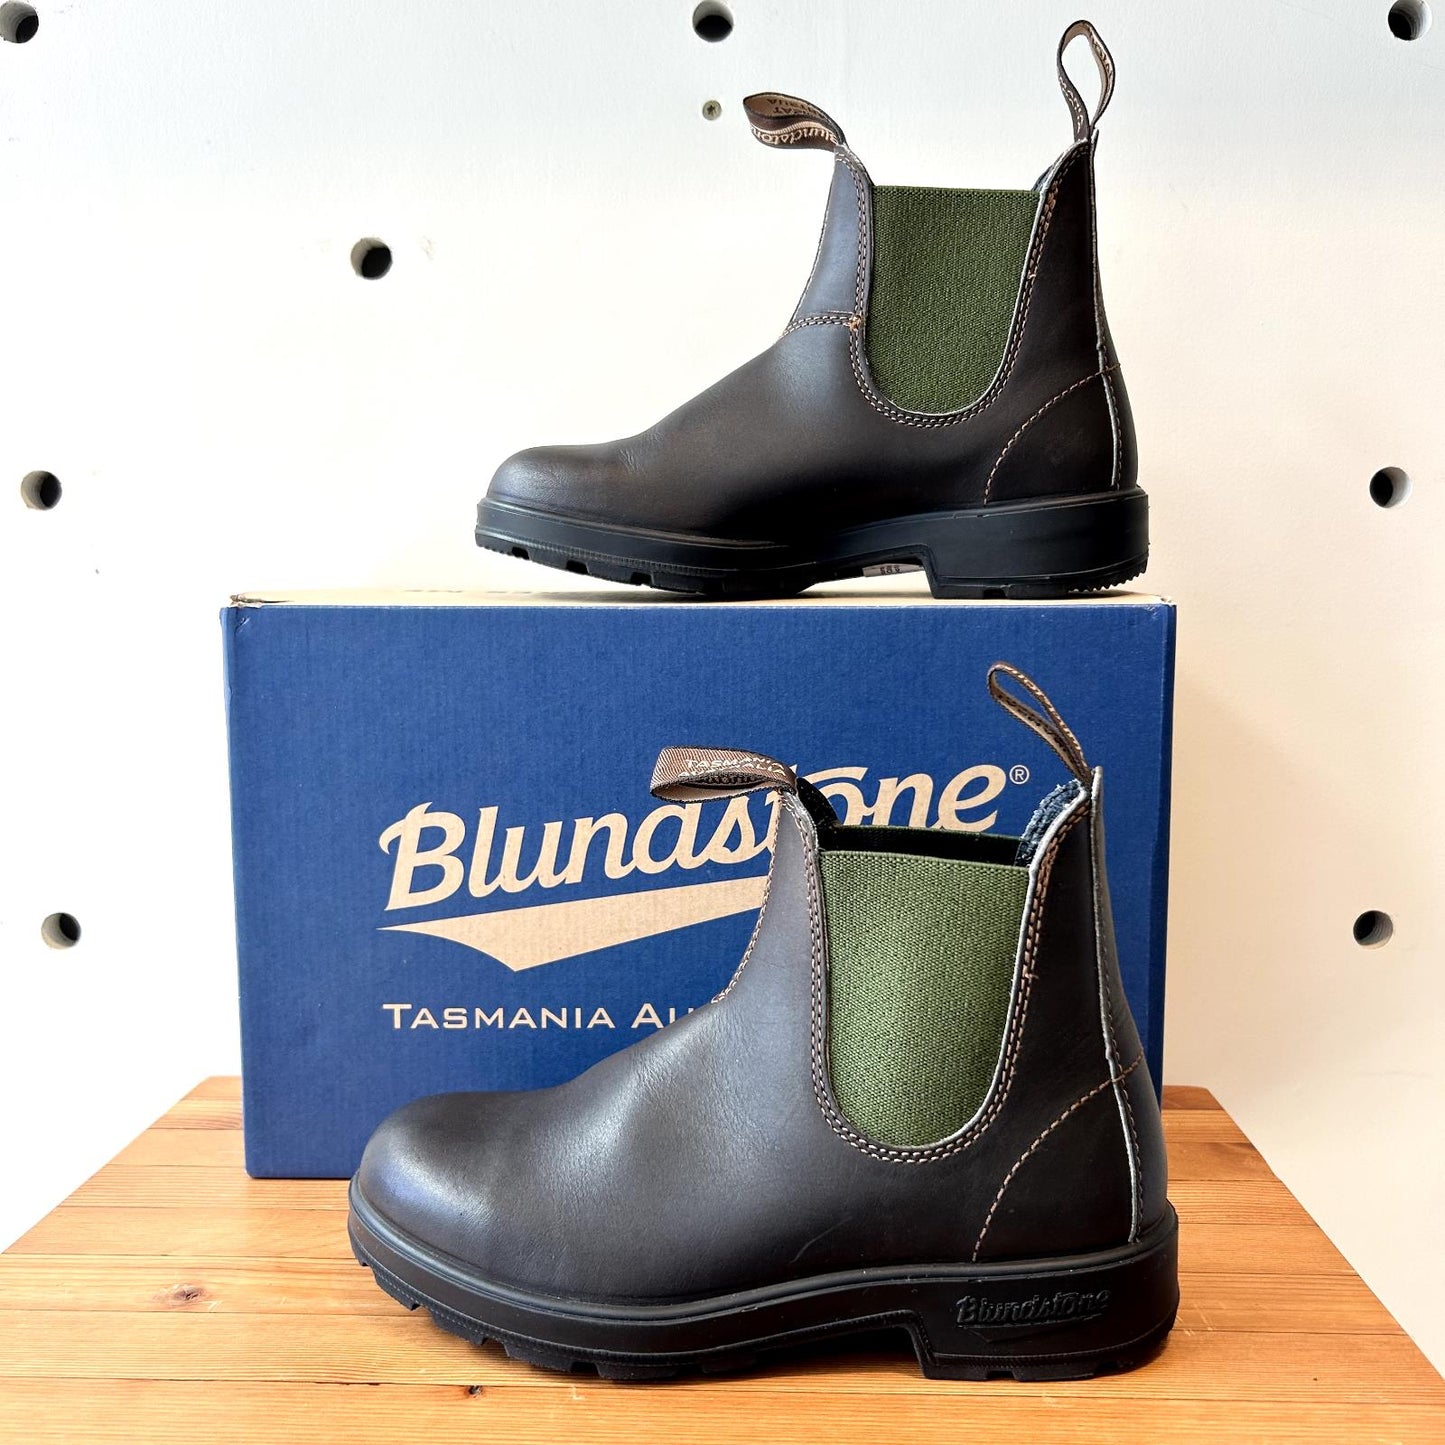 7.5 US - Blundstone Stout Brown & Olive Elastic Sided Boots NEW w/ Box 0413AW